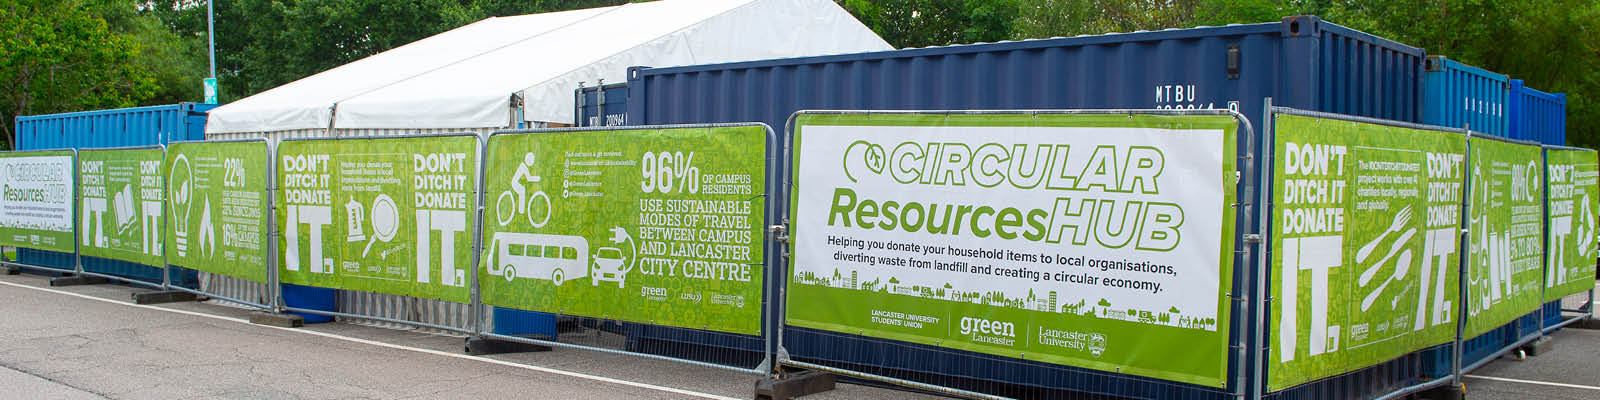 Containers located on South West Campus for the Circular Resource Hub